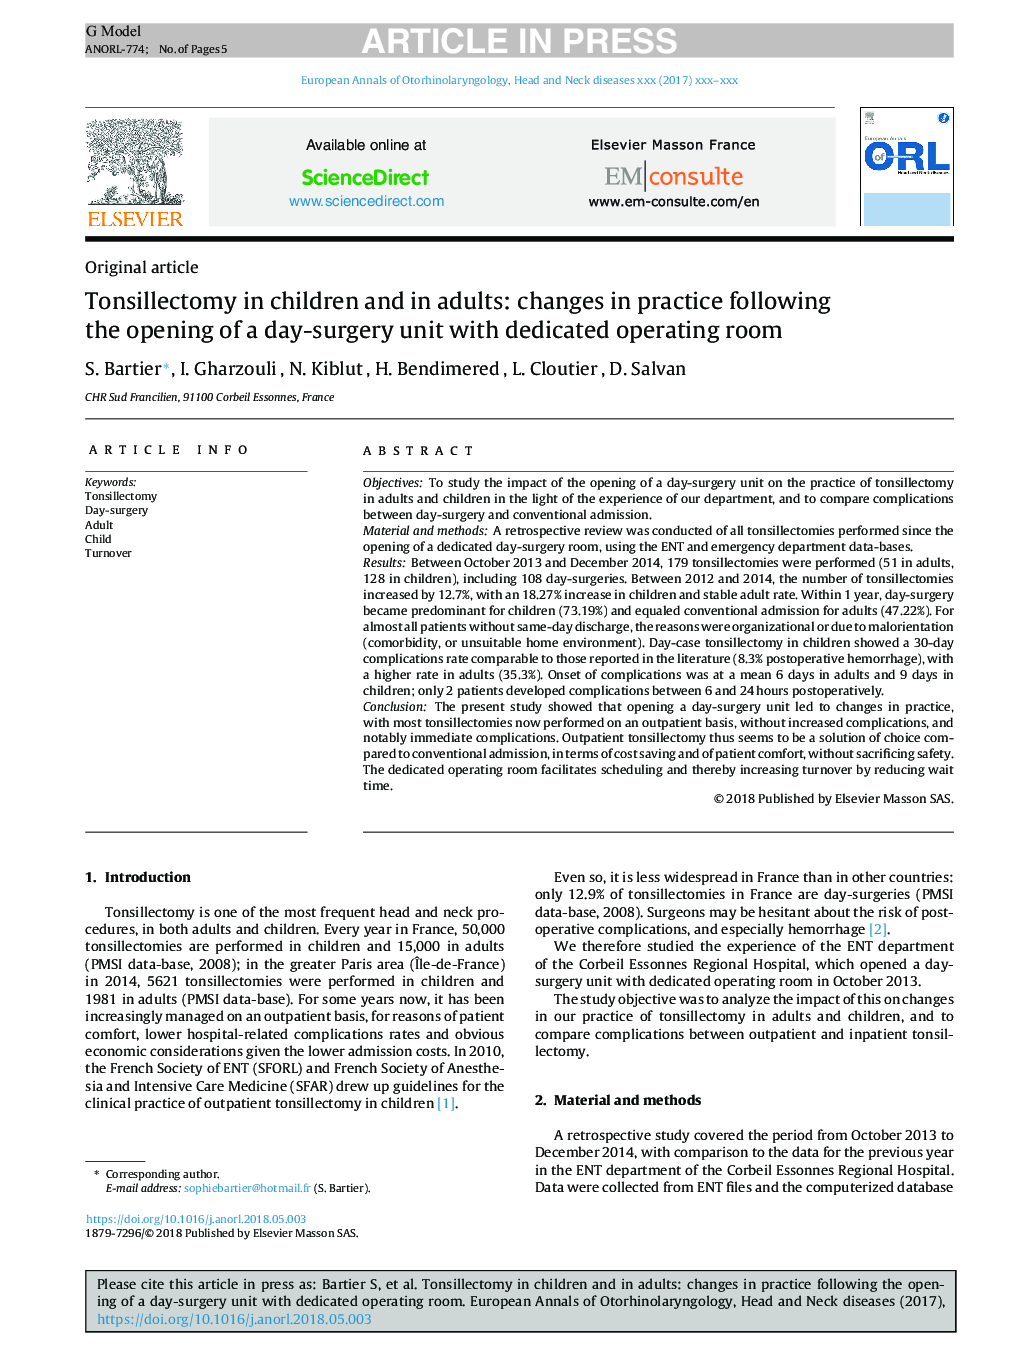 Tonsillectomy in children and in adults: changes in practice following the opening of a day-surgery unit with dedicated operating room